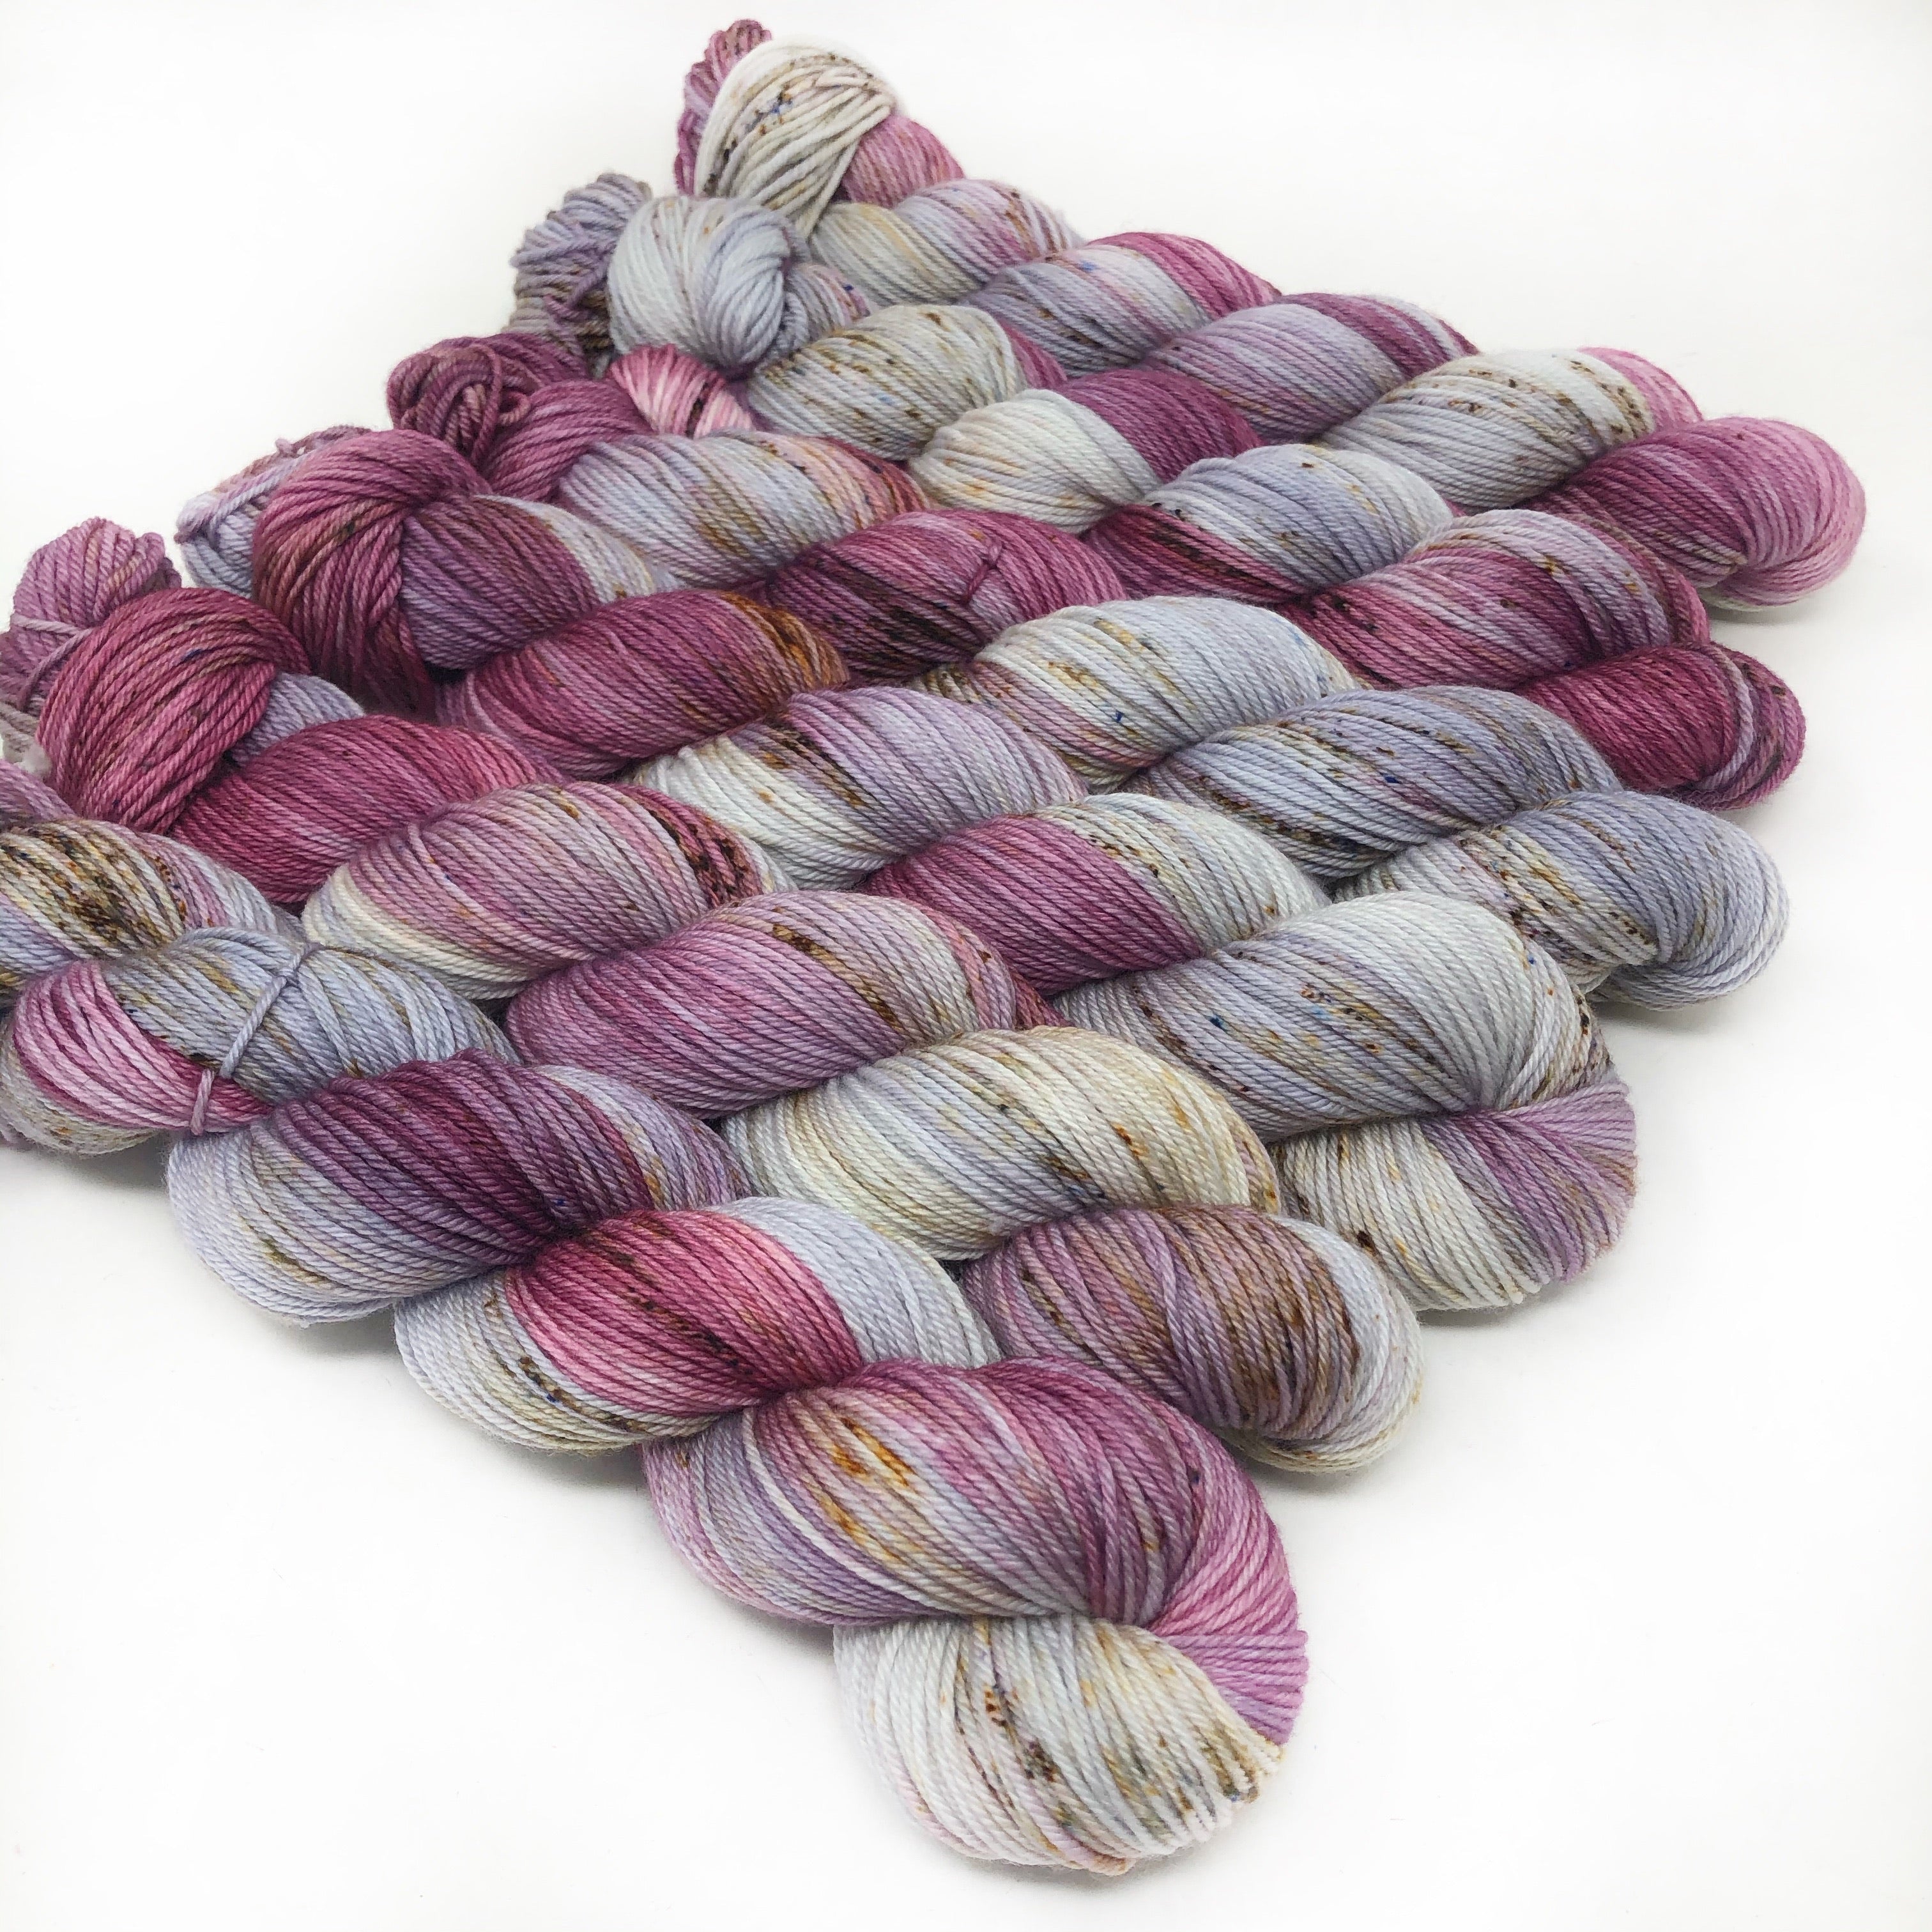 Soft Spring Start - Delightful DK - the perfect sweater yarn